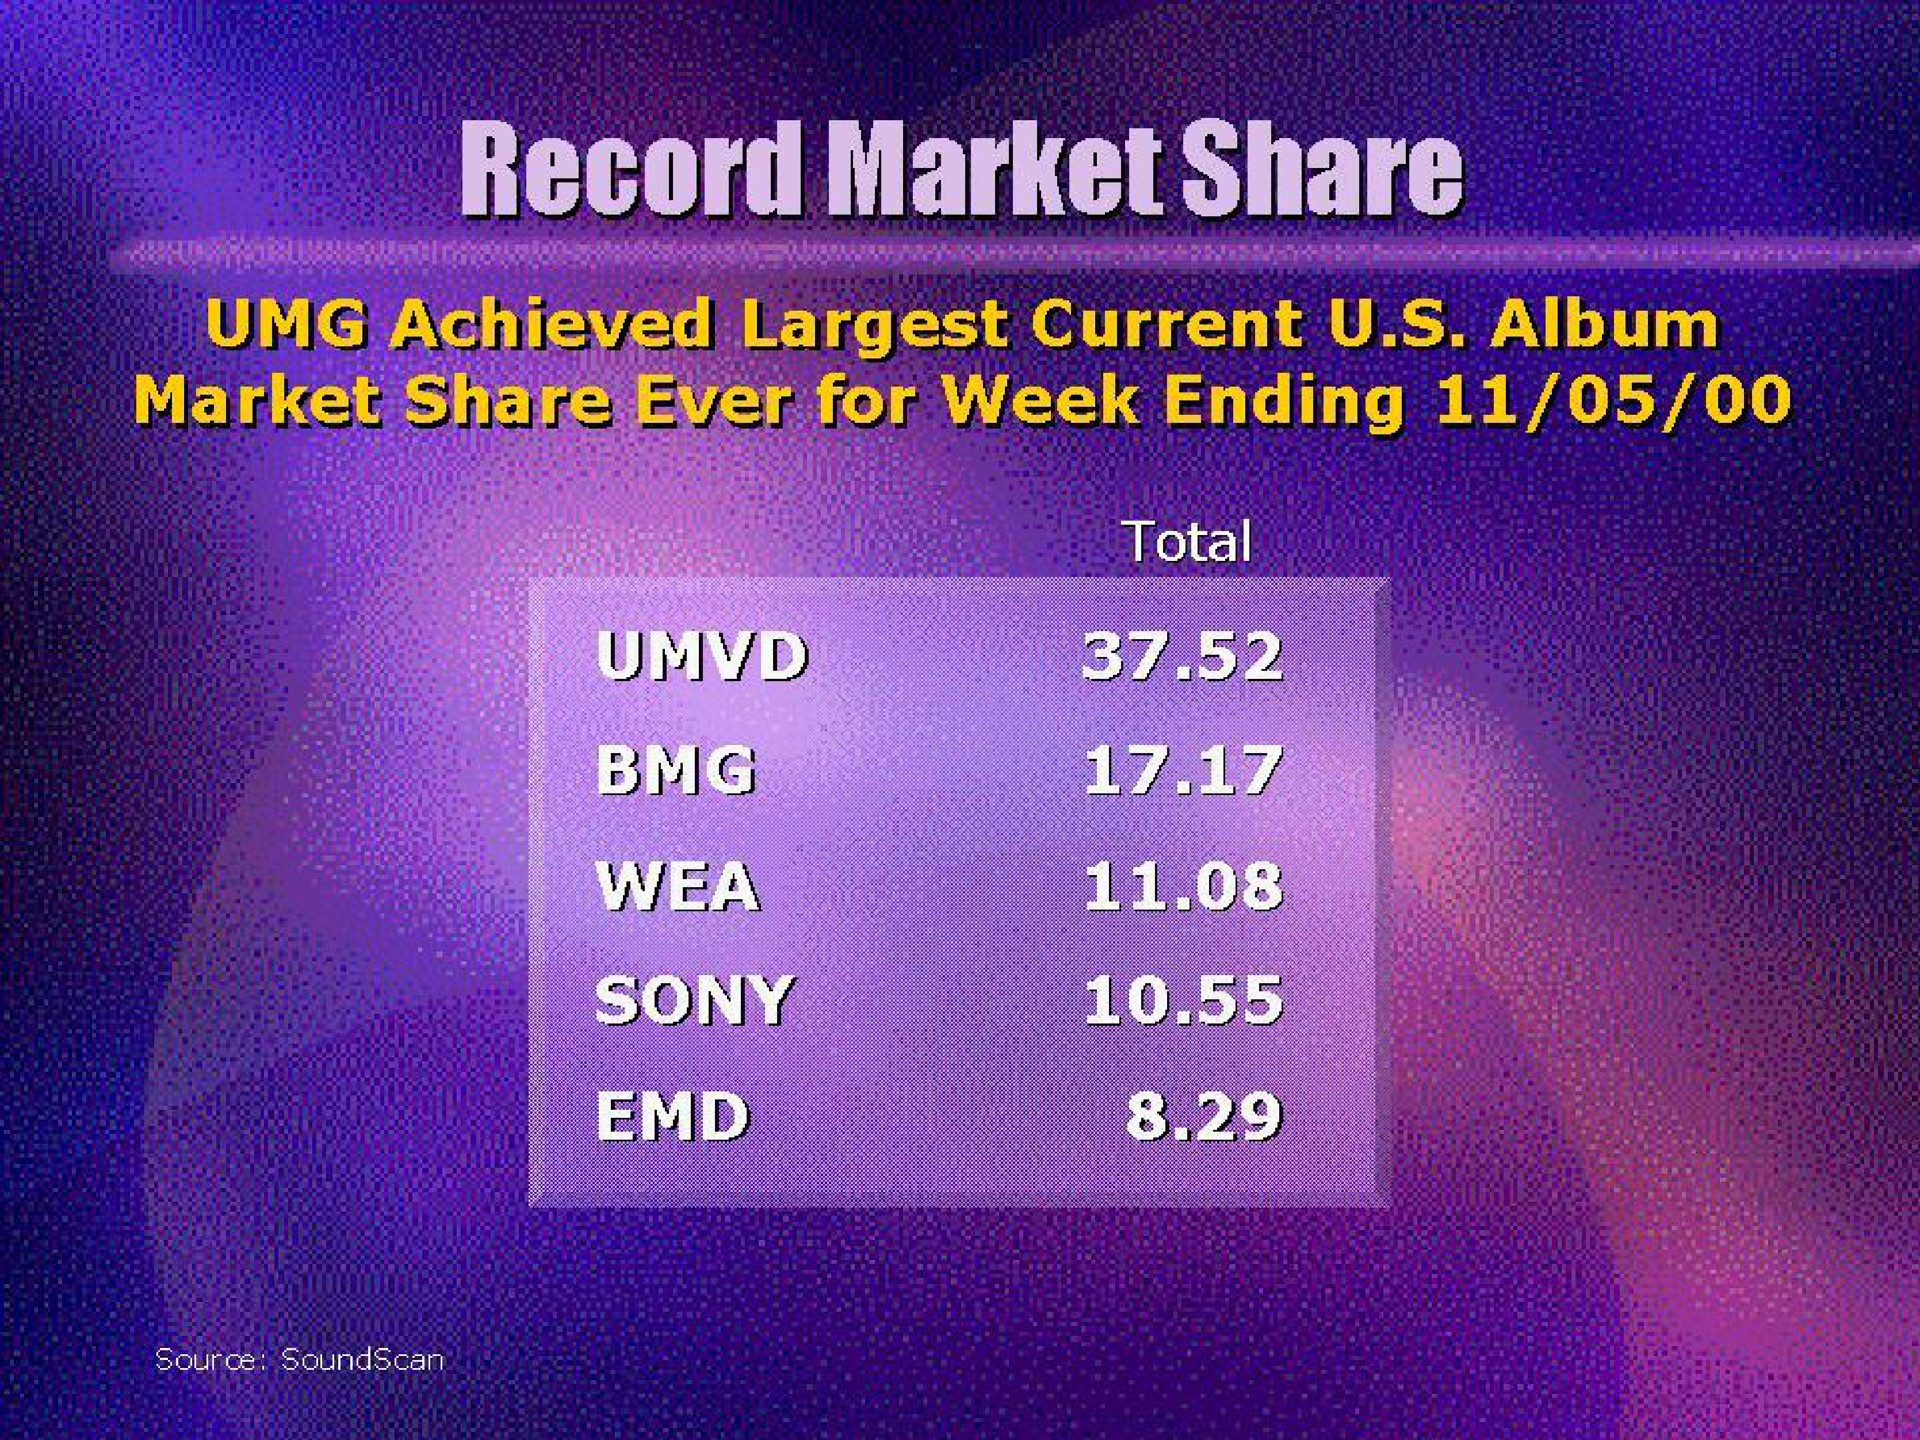 record market share achiever aas | Universal Music Group